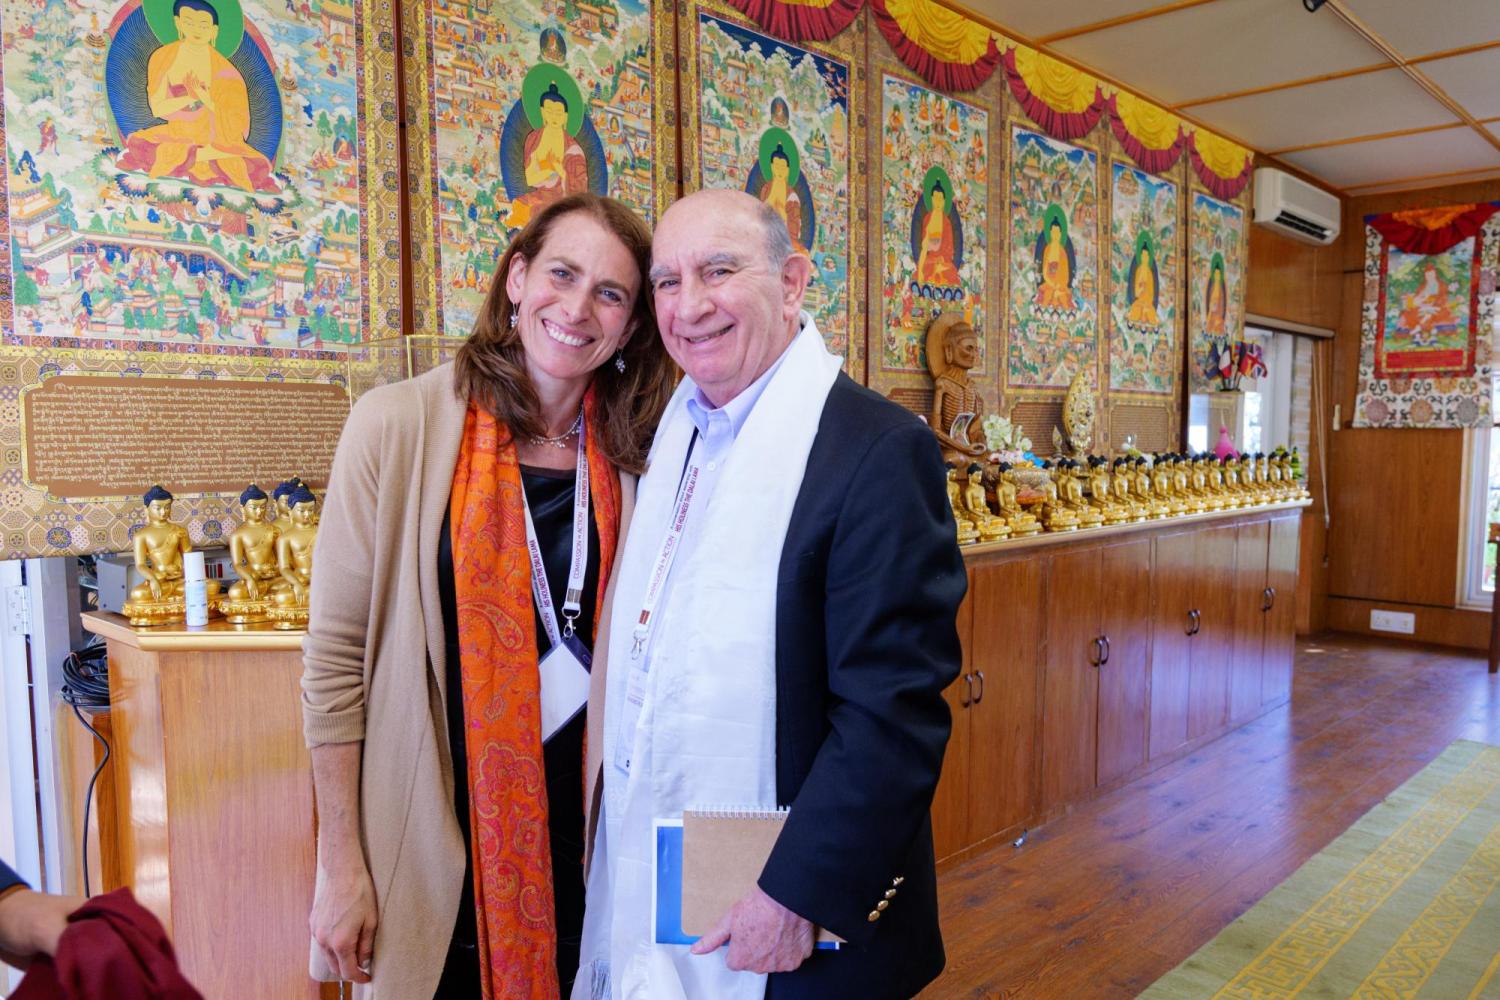 Sona Dimidjian, PhD, Director of the Renée Crown Wellness Institute & Dr. Philip P. DiStefano, chancellor at the University of Colorado Boulder.